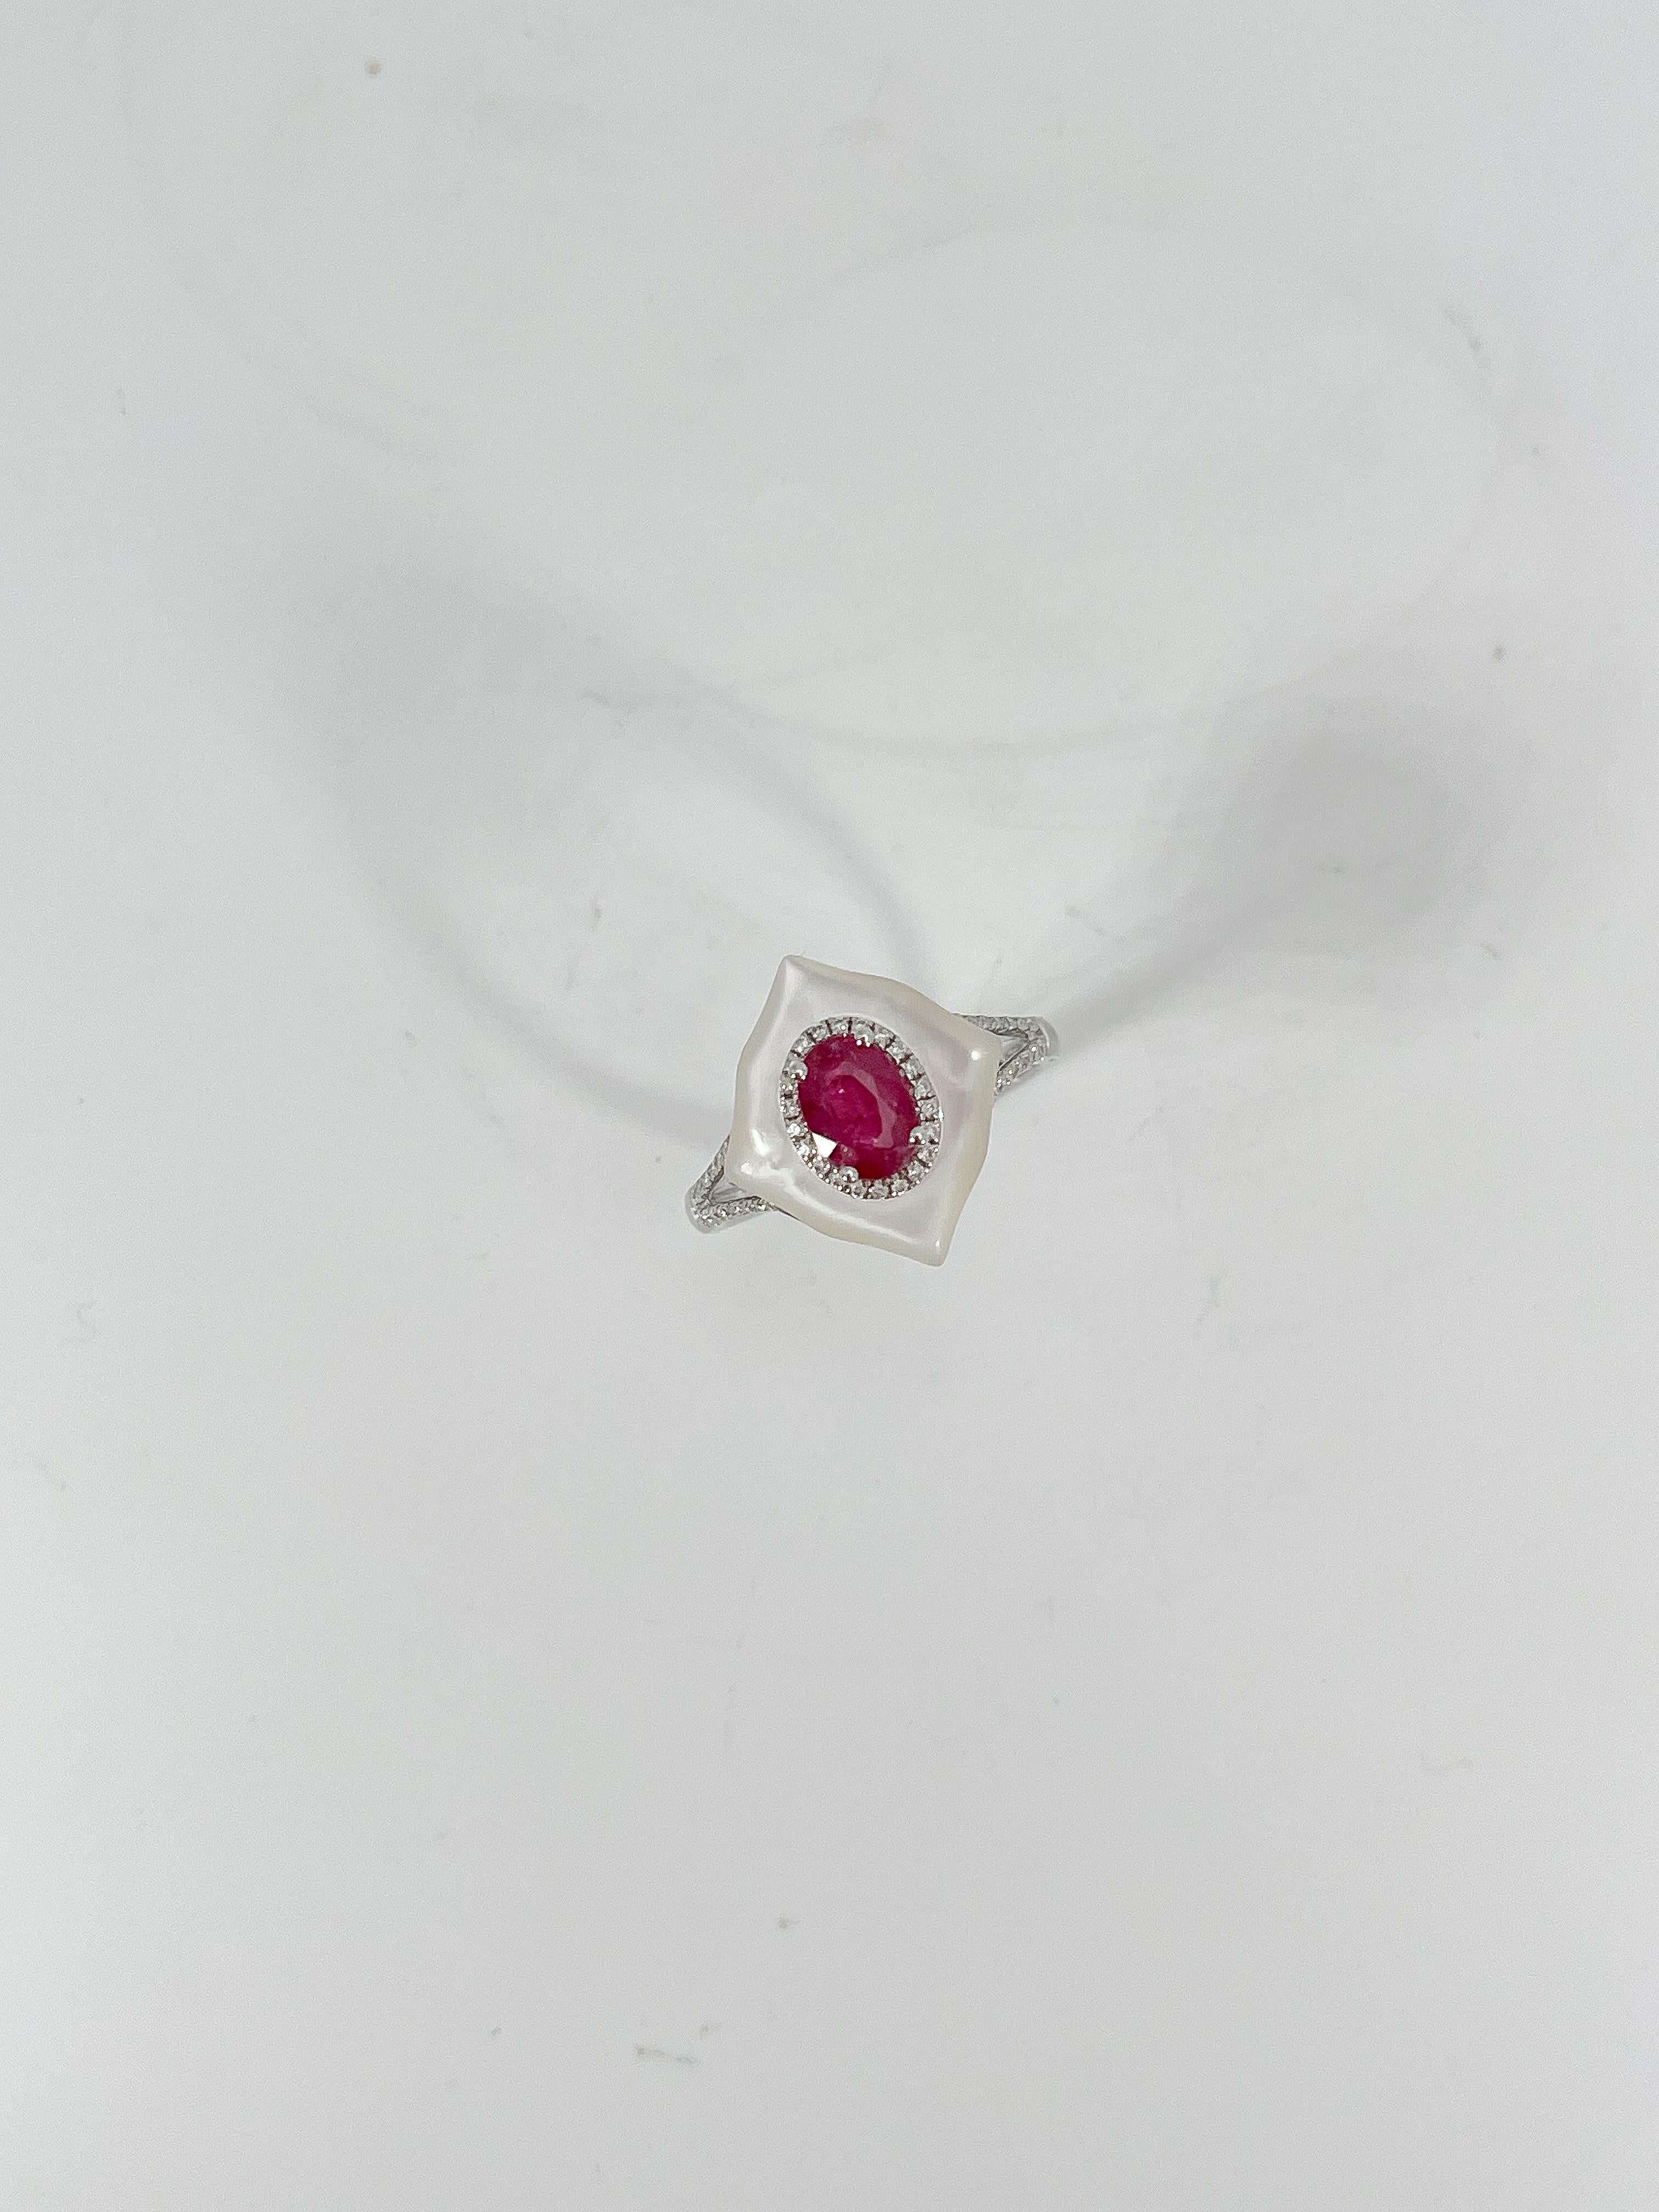 14k white gold 1.10 CTW oval ruby center stone surrounded by 2.14 CTW mother of pearl, and .14 CTW round diamonds on the sides and a halo around the ruby. This ring is a size 7, the center stone measures 6.8mm x 4.8mm, the mother of pearl design